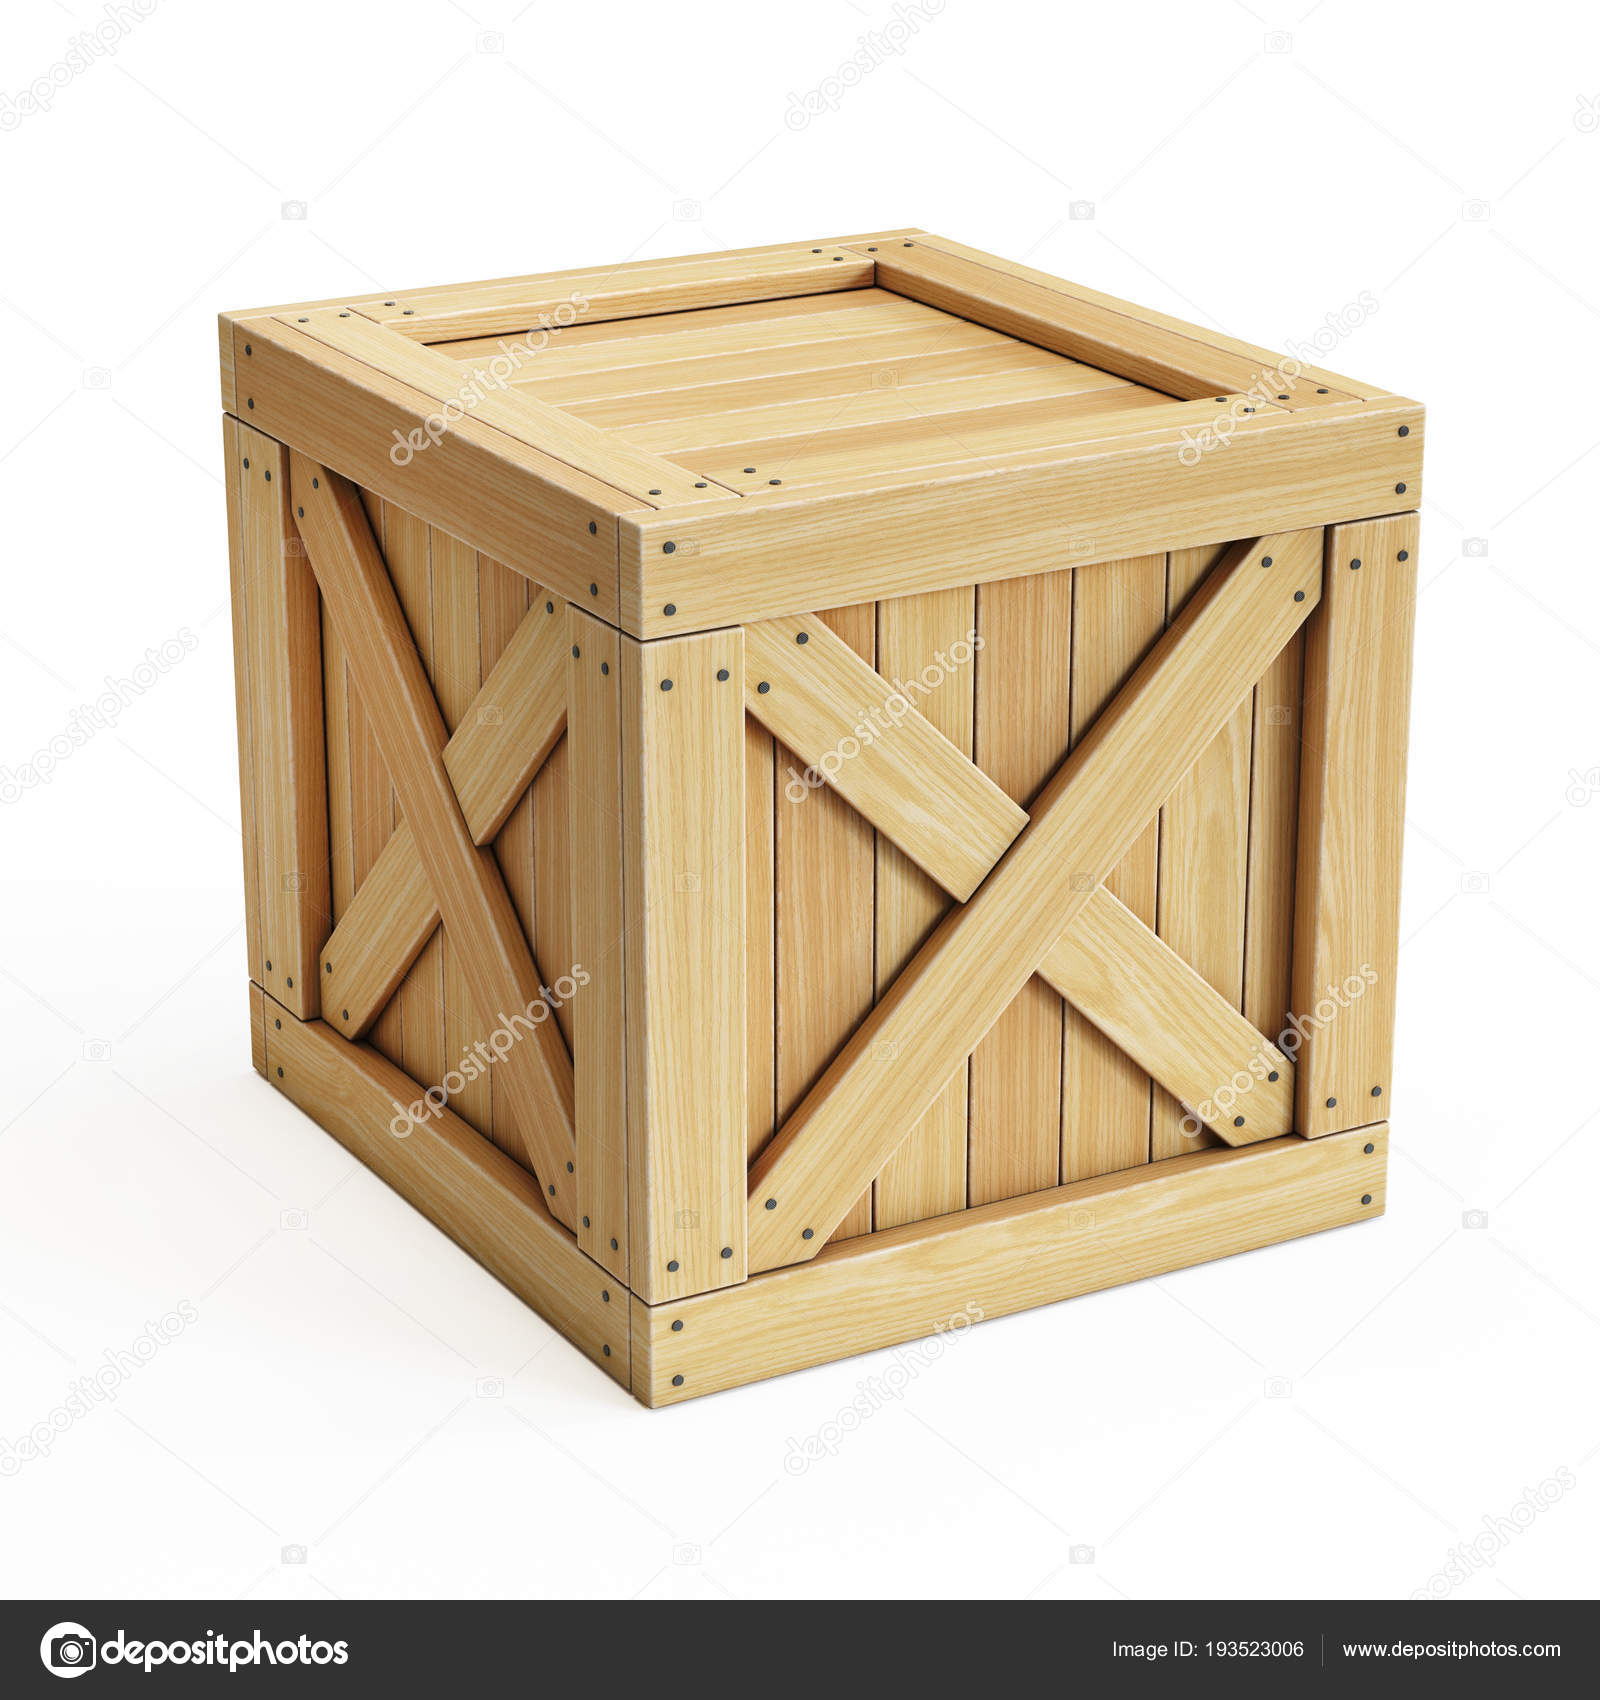 Cargo Box. Wooden Box. Stock Photo, Picture and Royalty Free Image. Image  123716796.